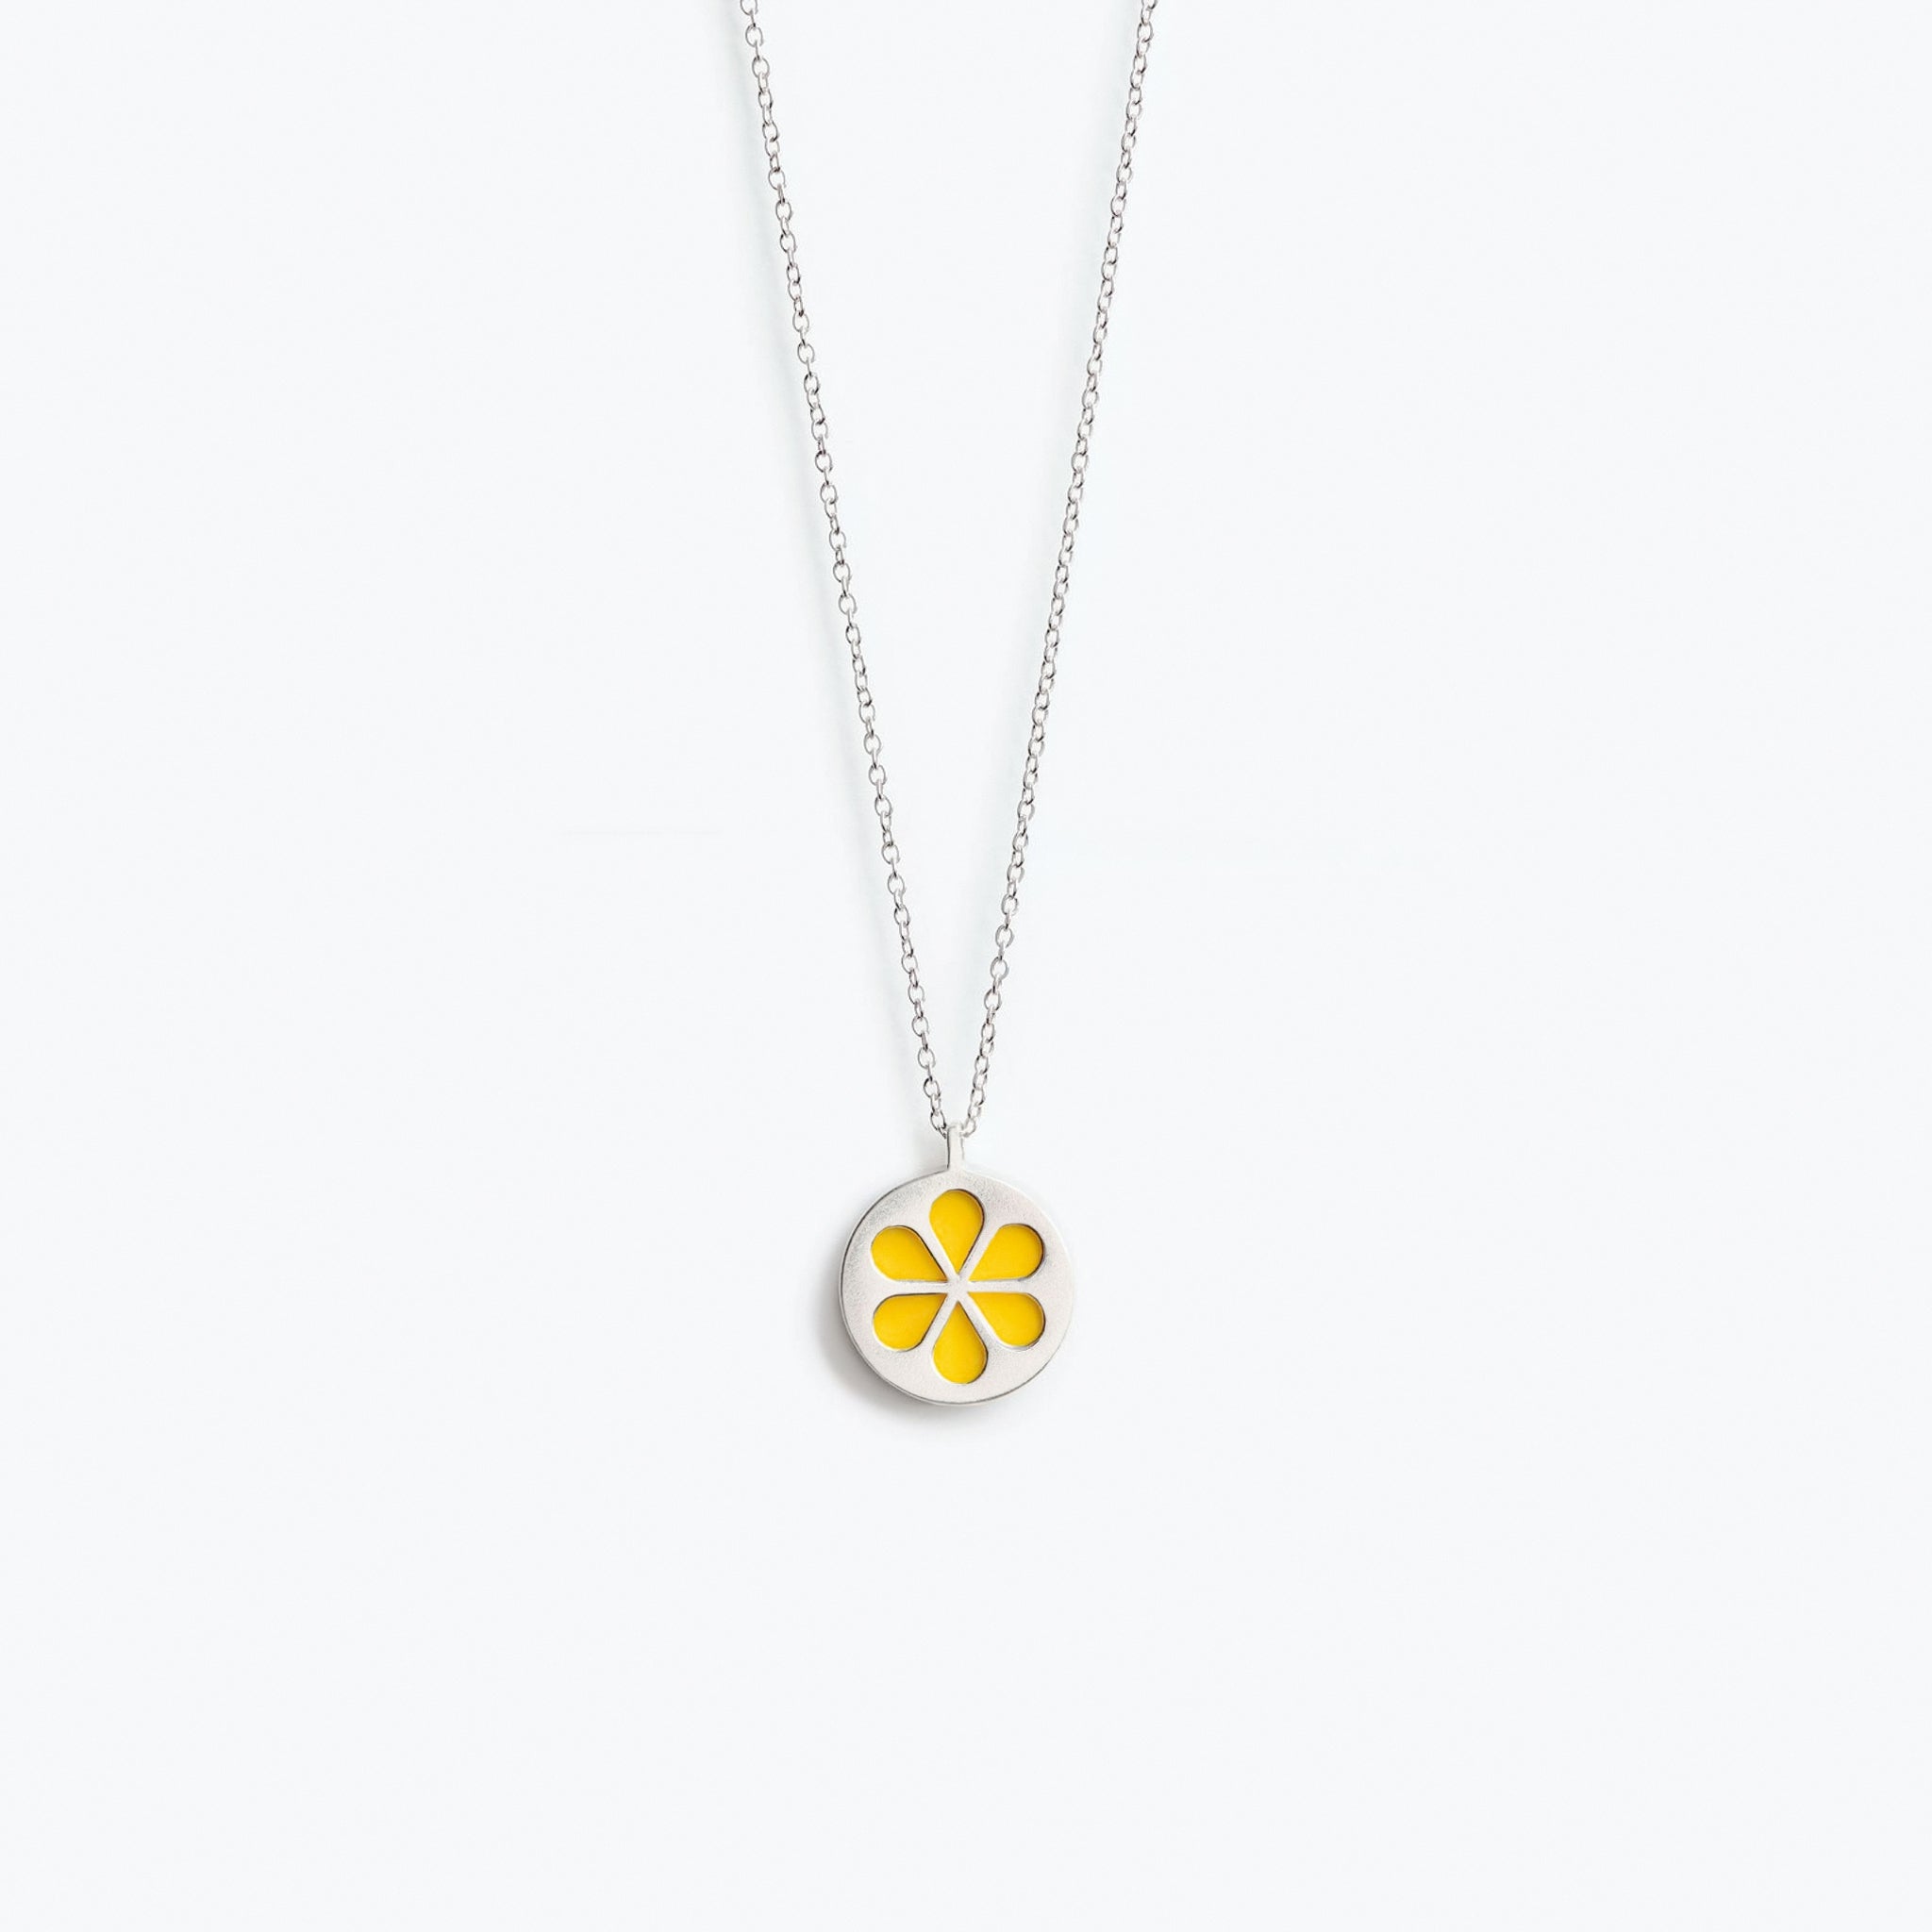 A simple bright yellow flower pendant necklace, mounted on a fine trace chain.